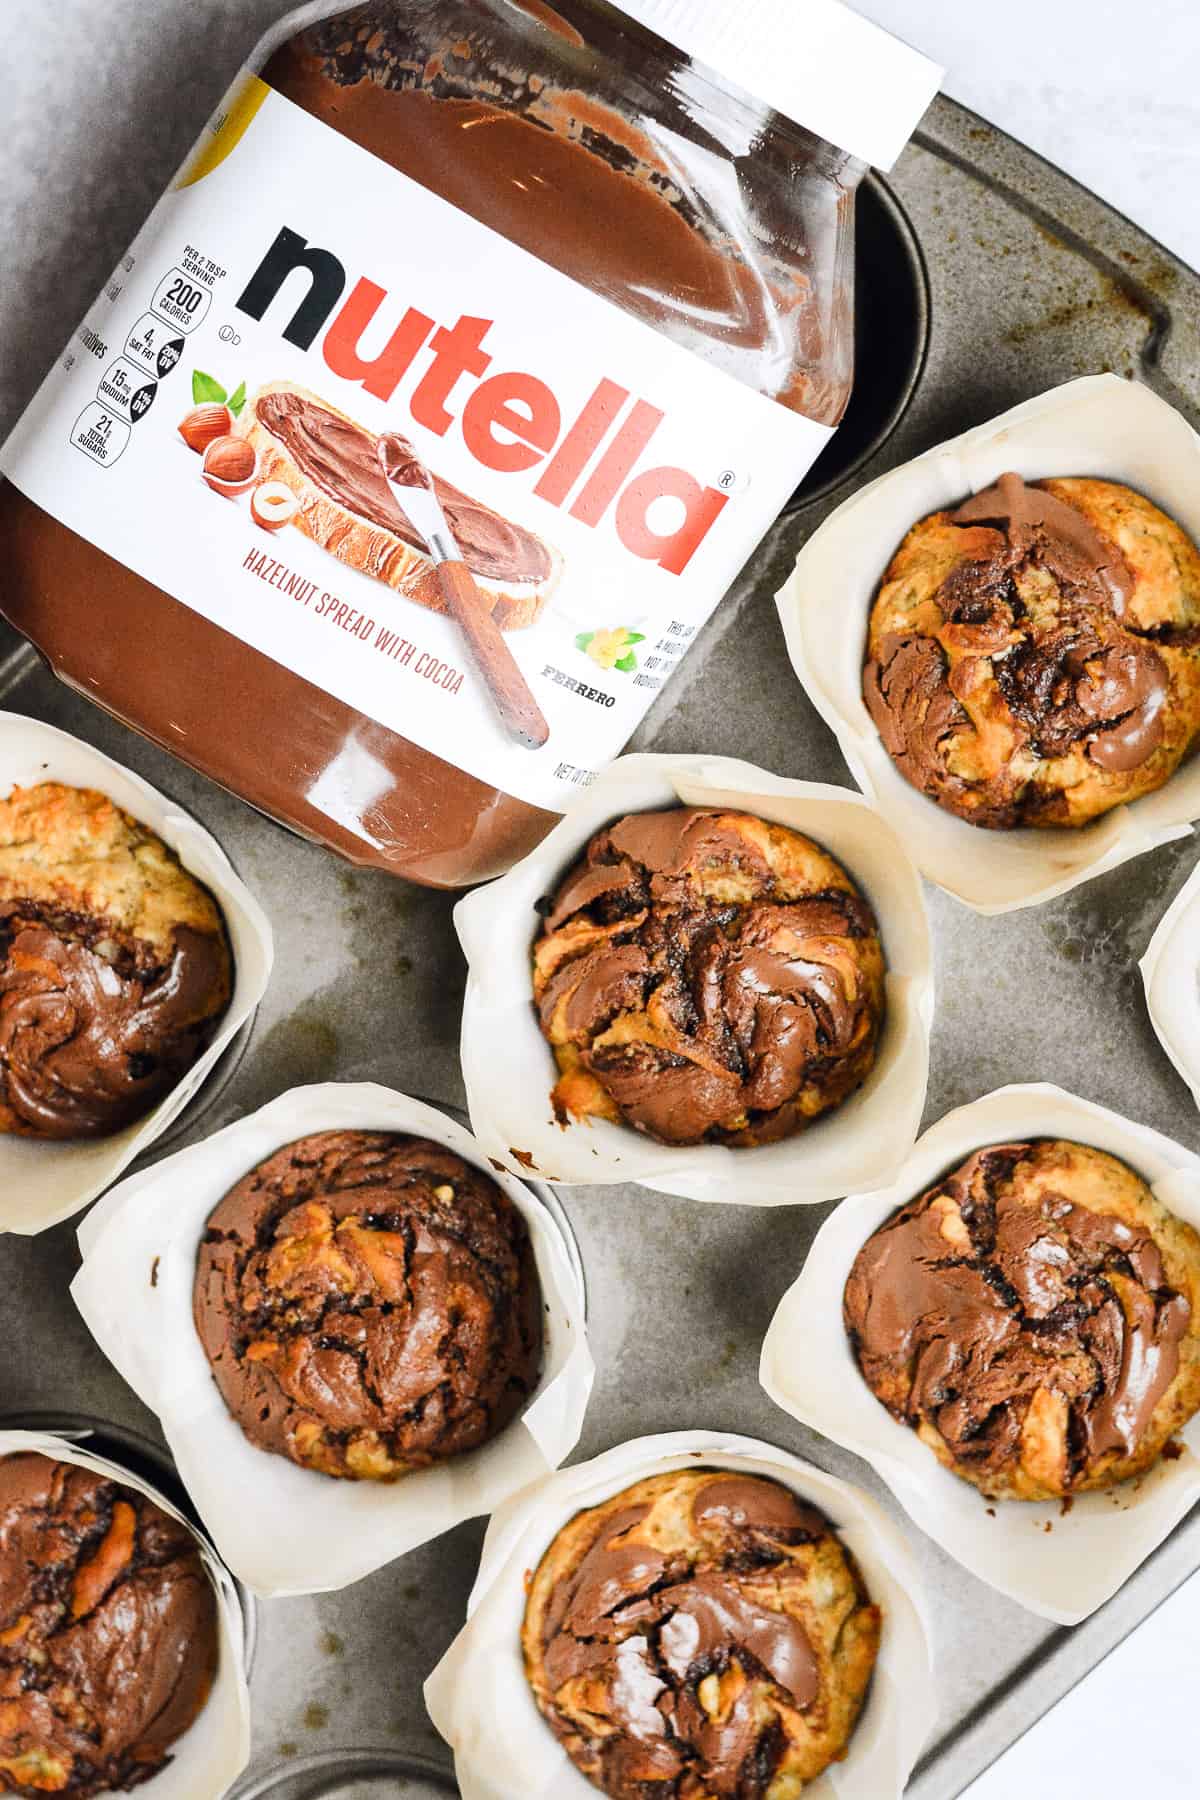 Nutella container next to nutella banana muffins in muffin tin.